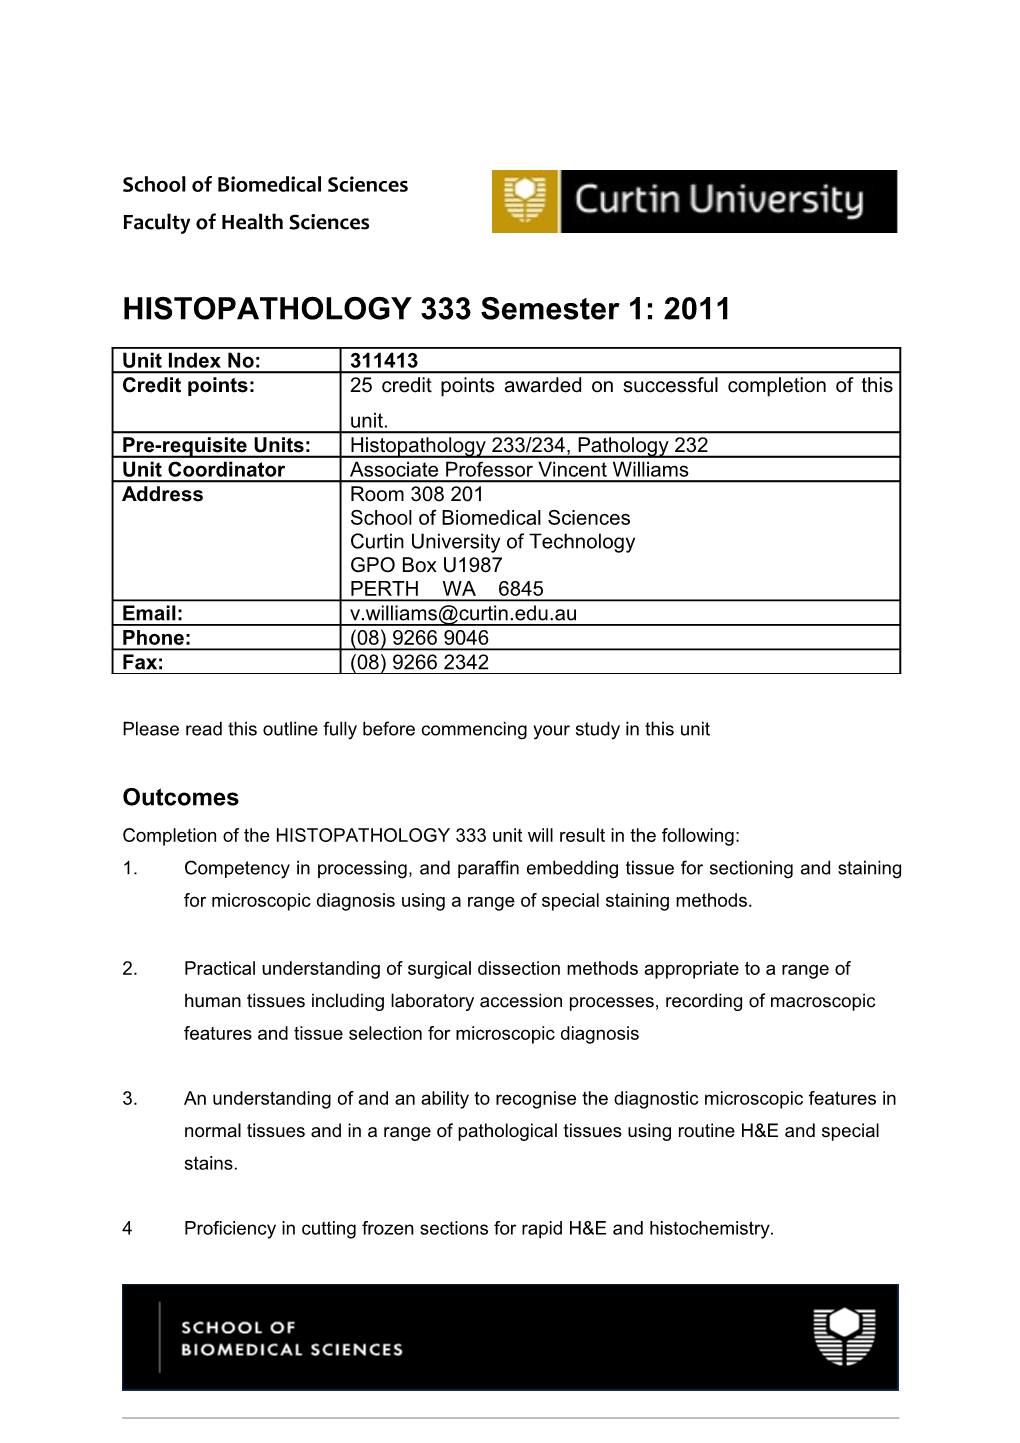 Completion of the HISTOPATHOLOGY 333Unit Will Result in the Following